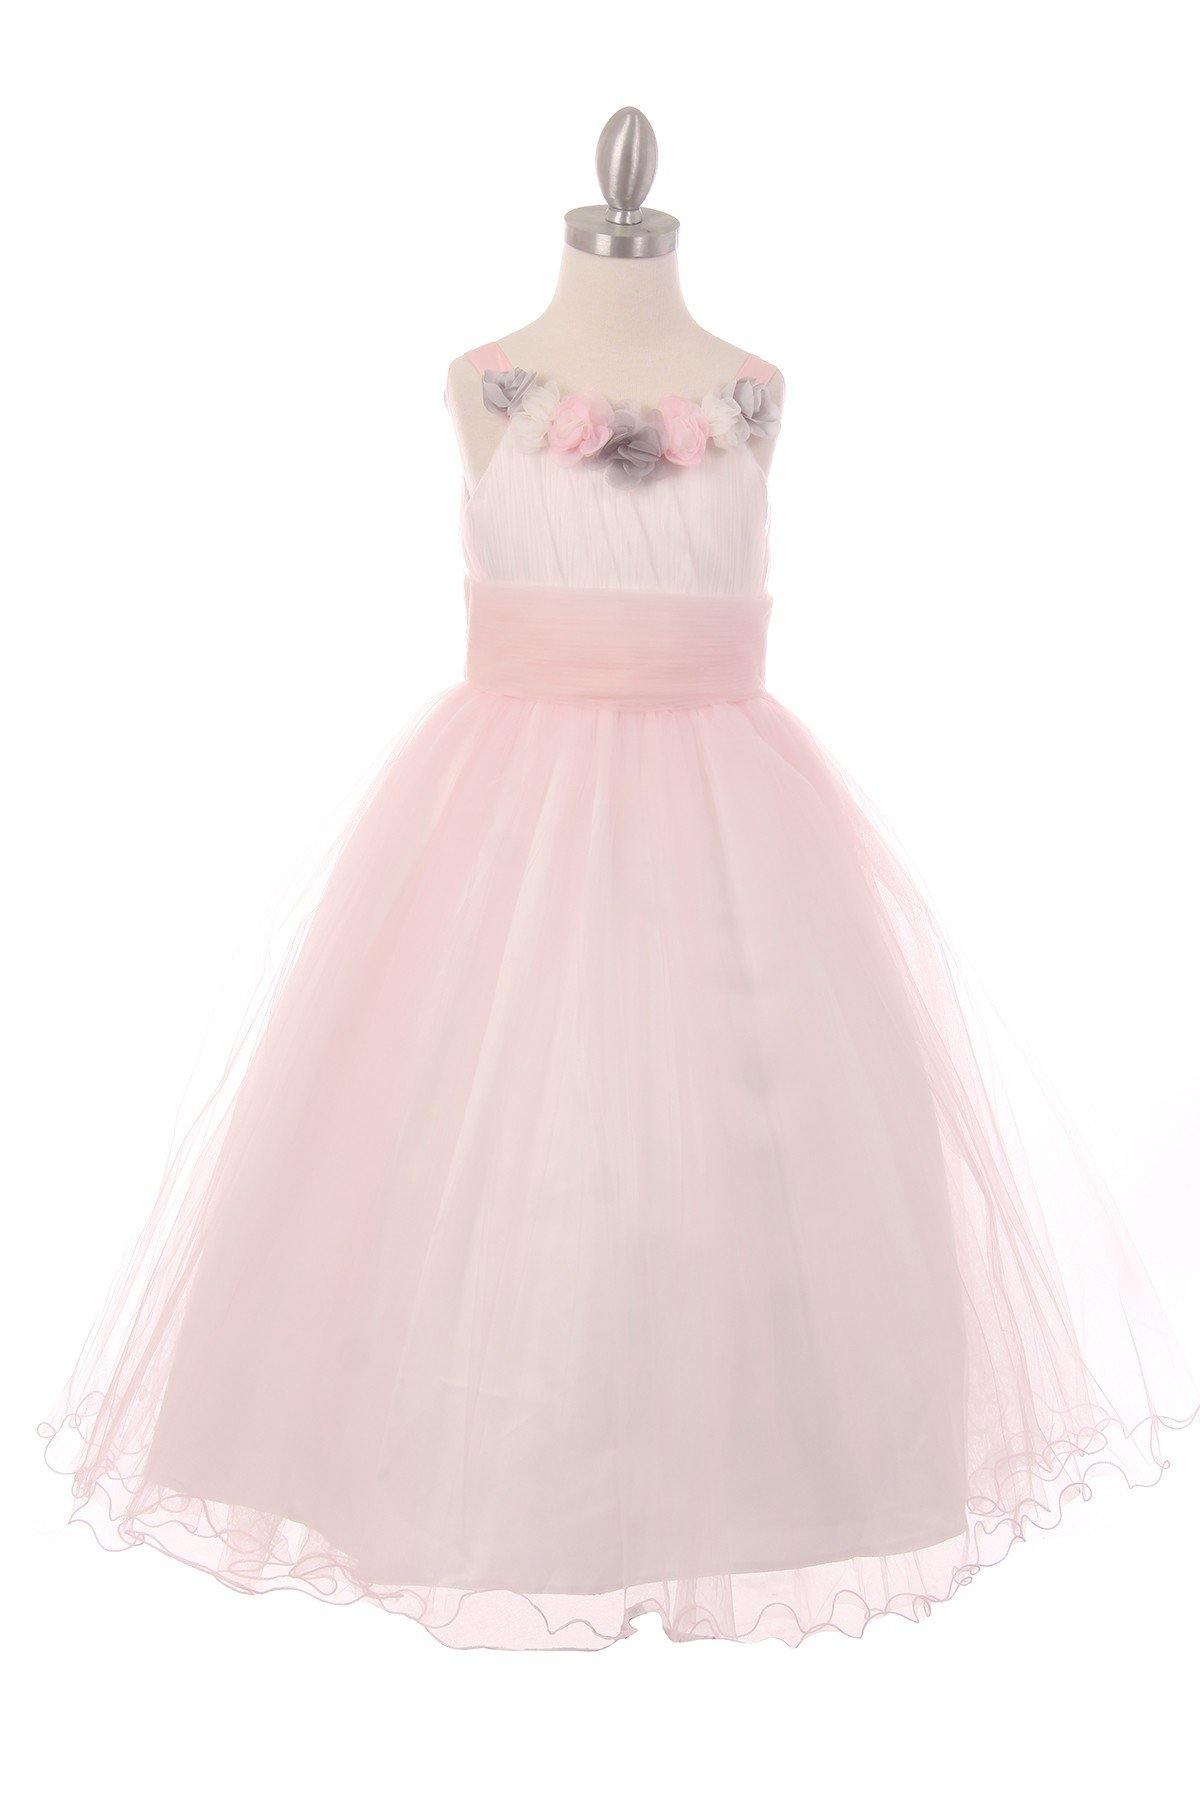 Rose Soft Tulle with Floral Detailing Flower Girls Dress for $80.99 ...